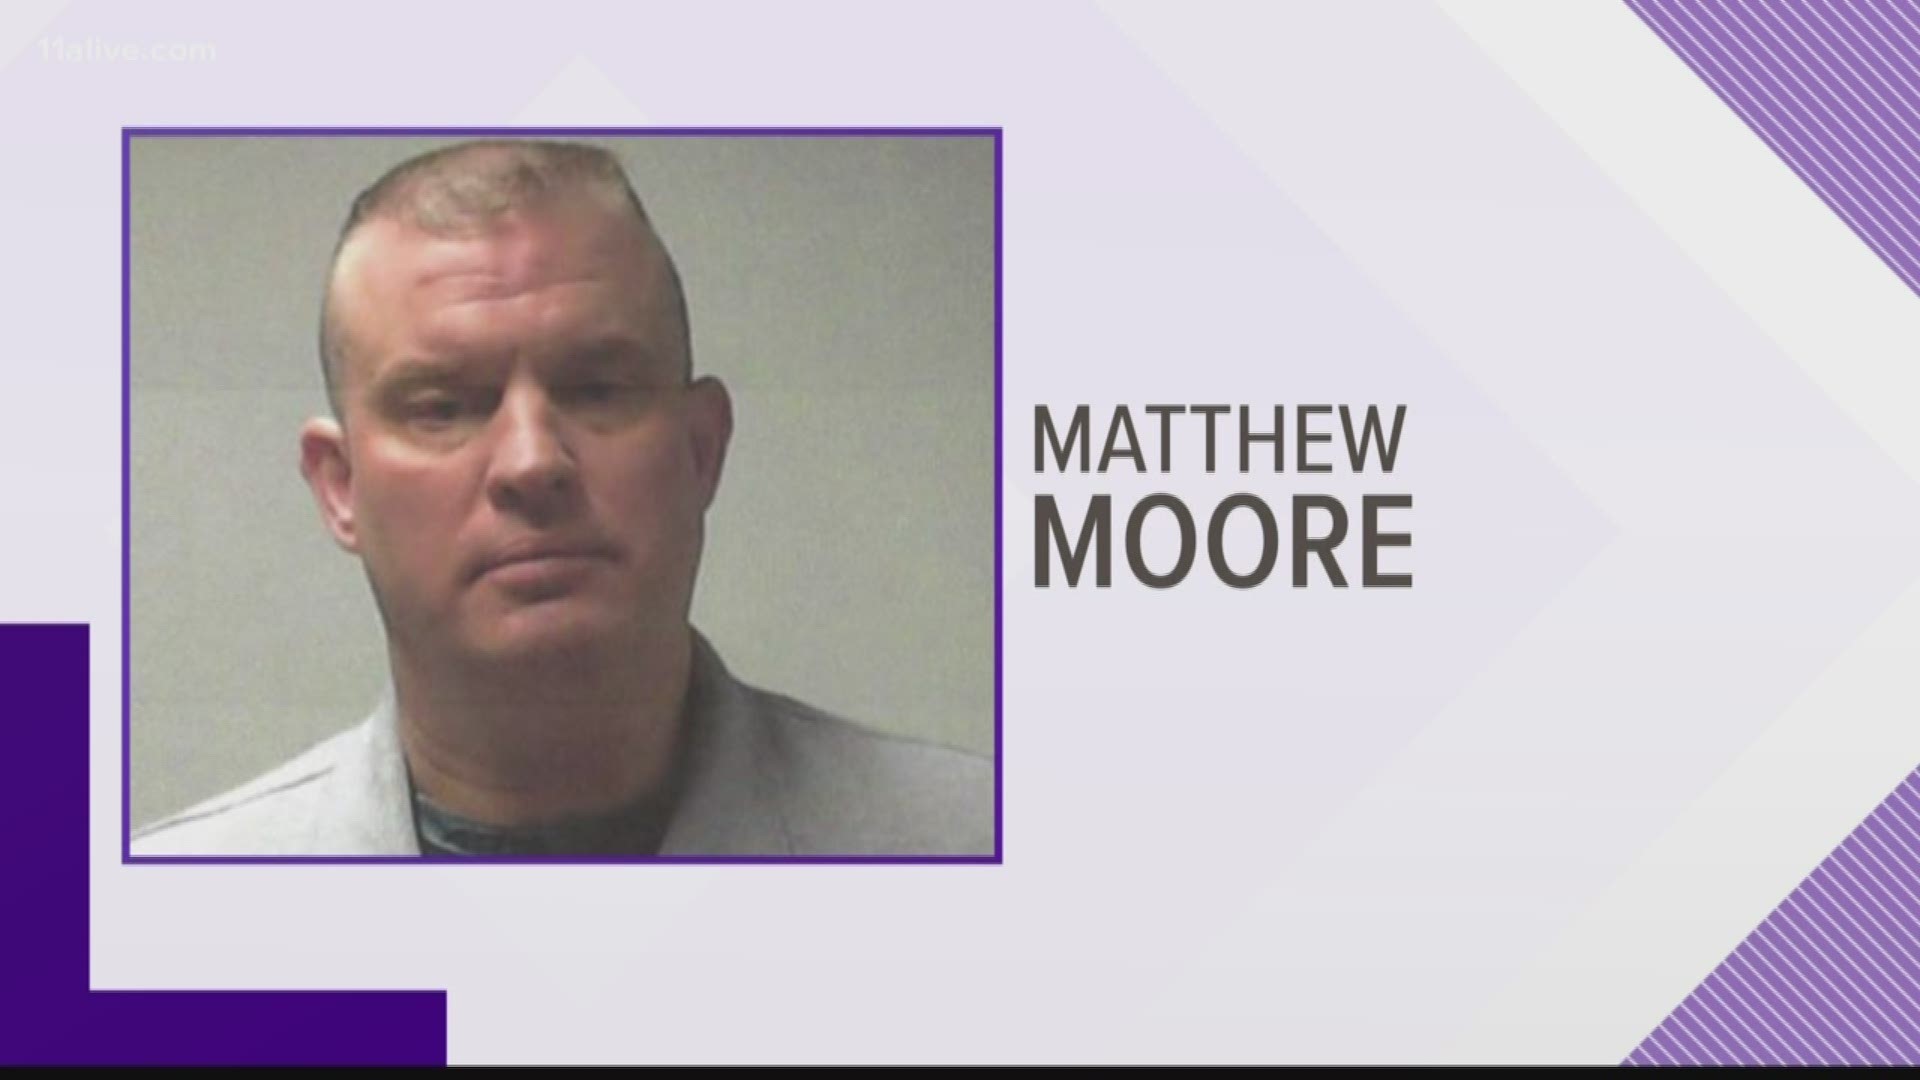 50-year-old Matthew Moore was indicted by a Fulton County Grand Jury for raping two women in Sandy Springs, Georgia.